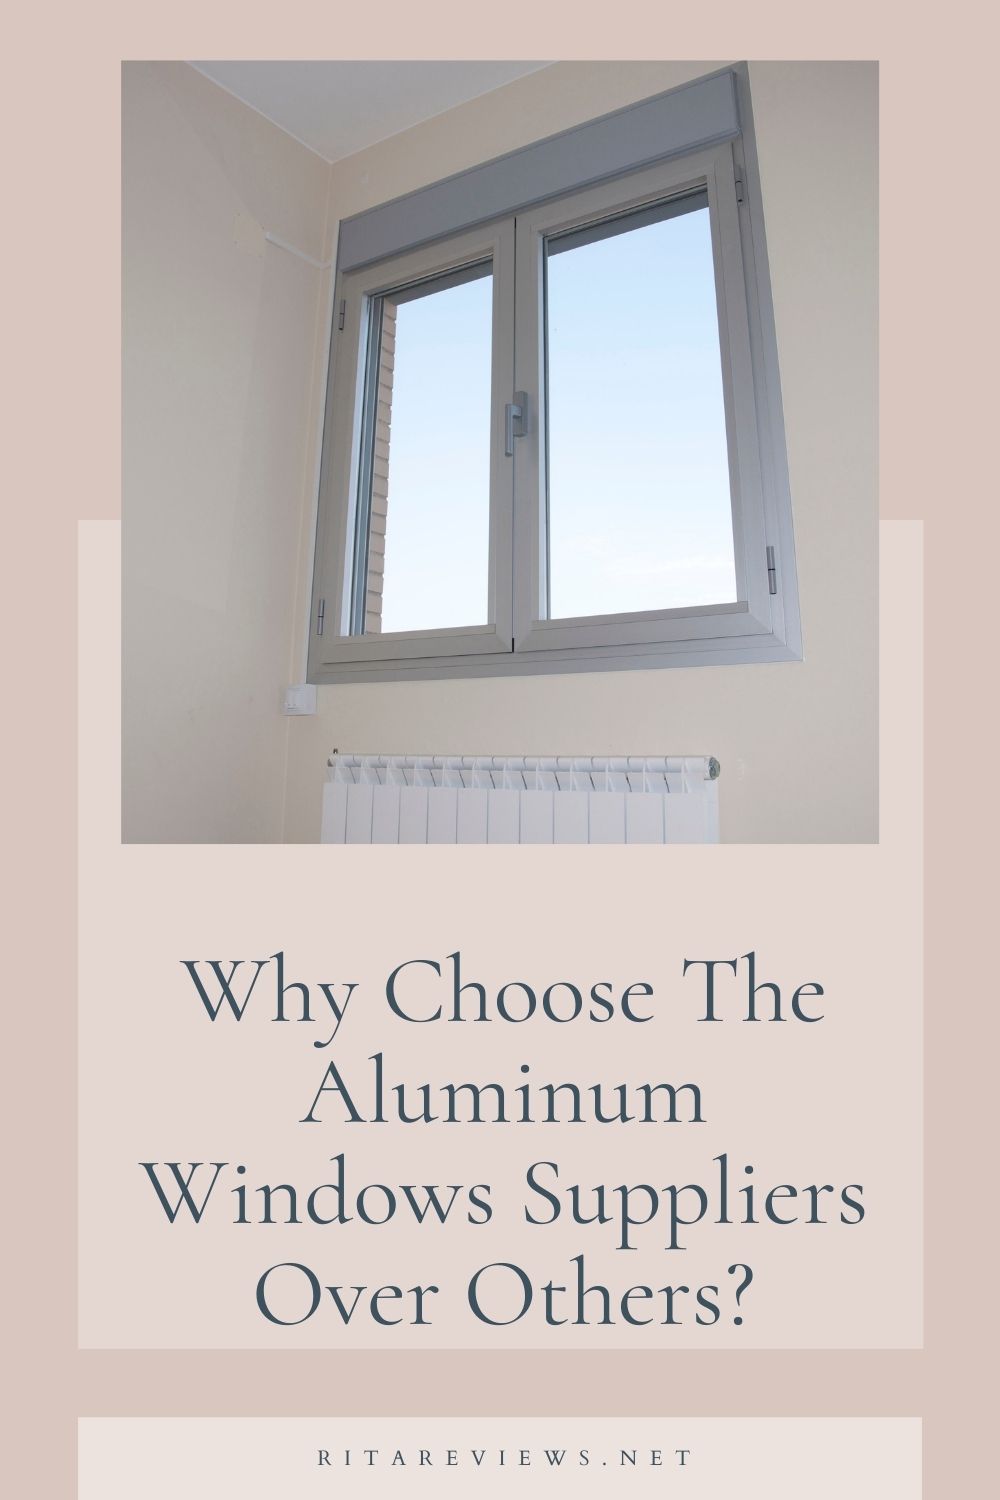 Why Choose The Aluminum Windows Suppliers Over Others